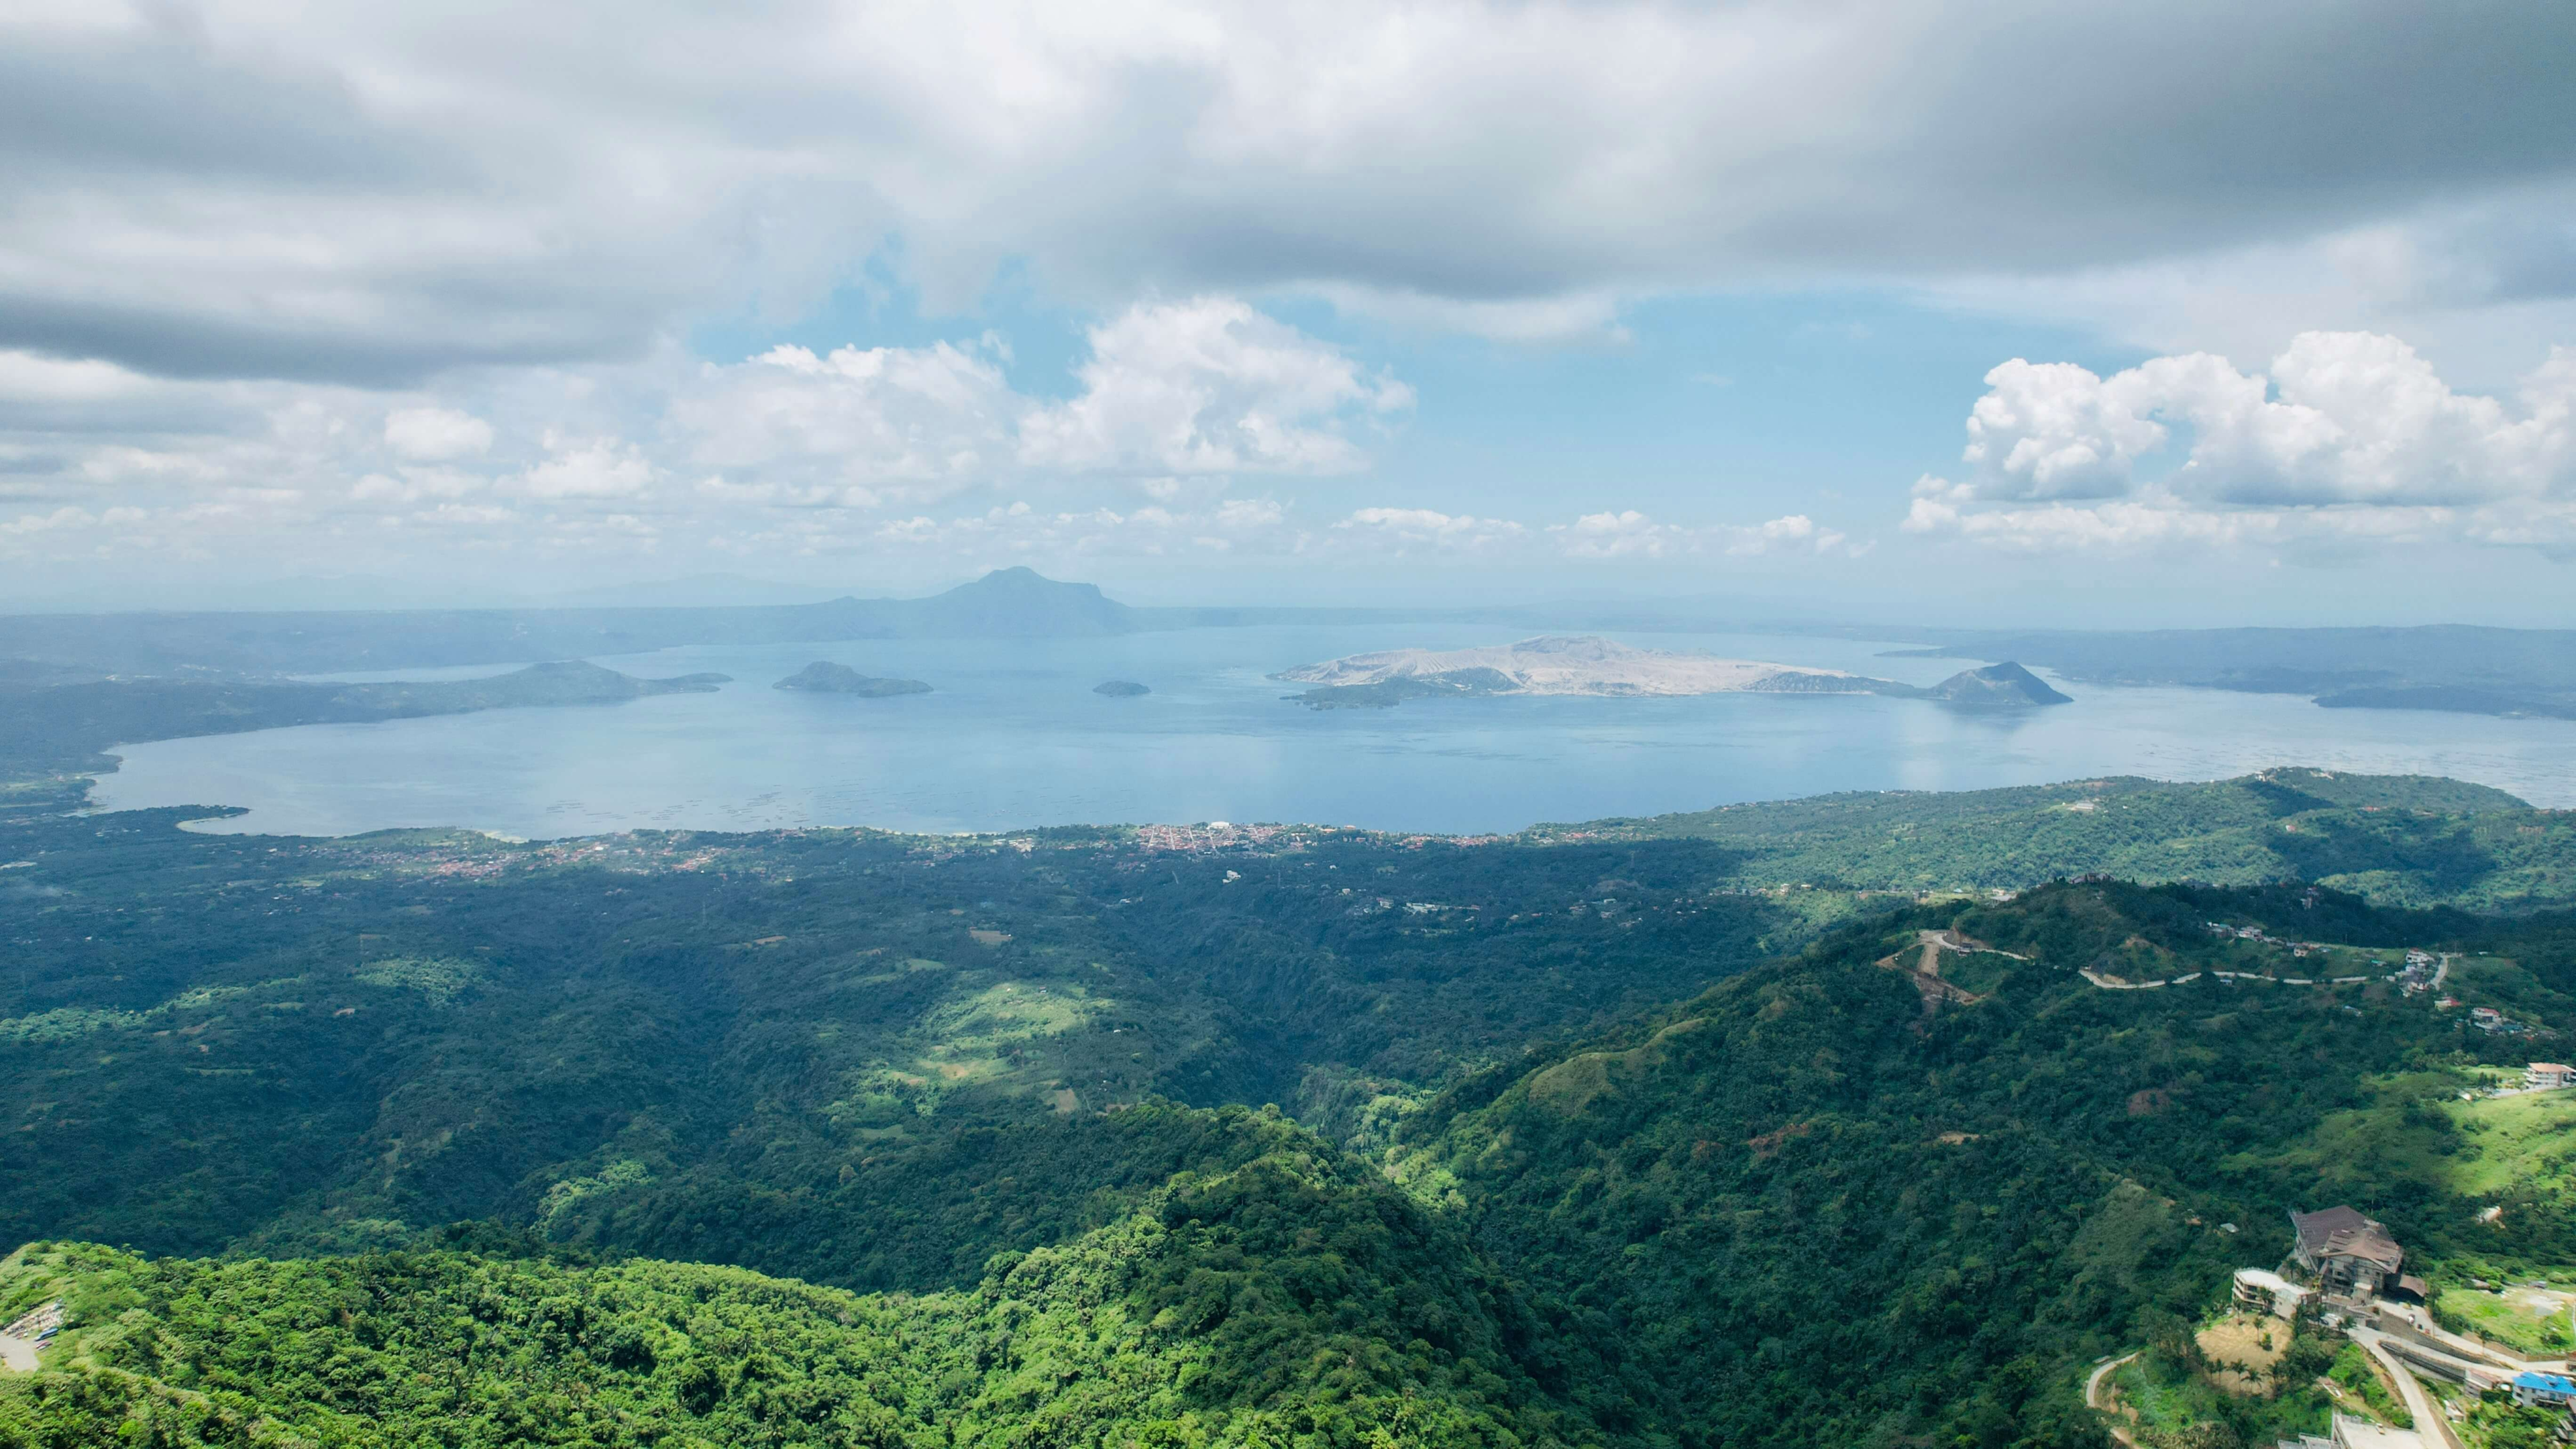 Tagaytay City Is More Than Just a Scenic Weekend Getaway